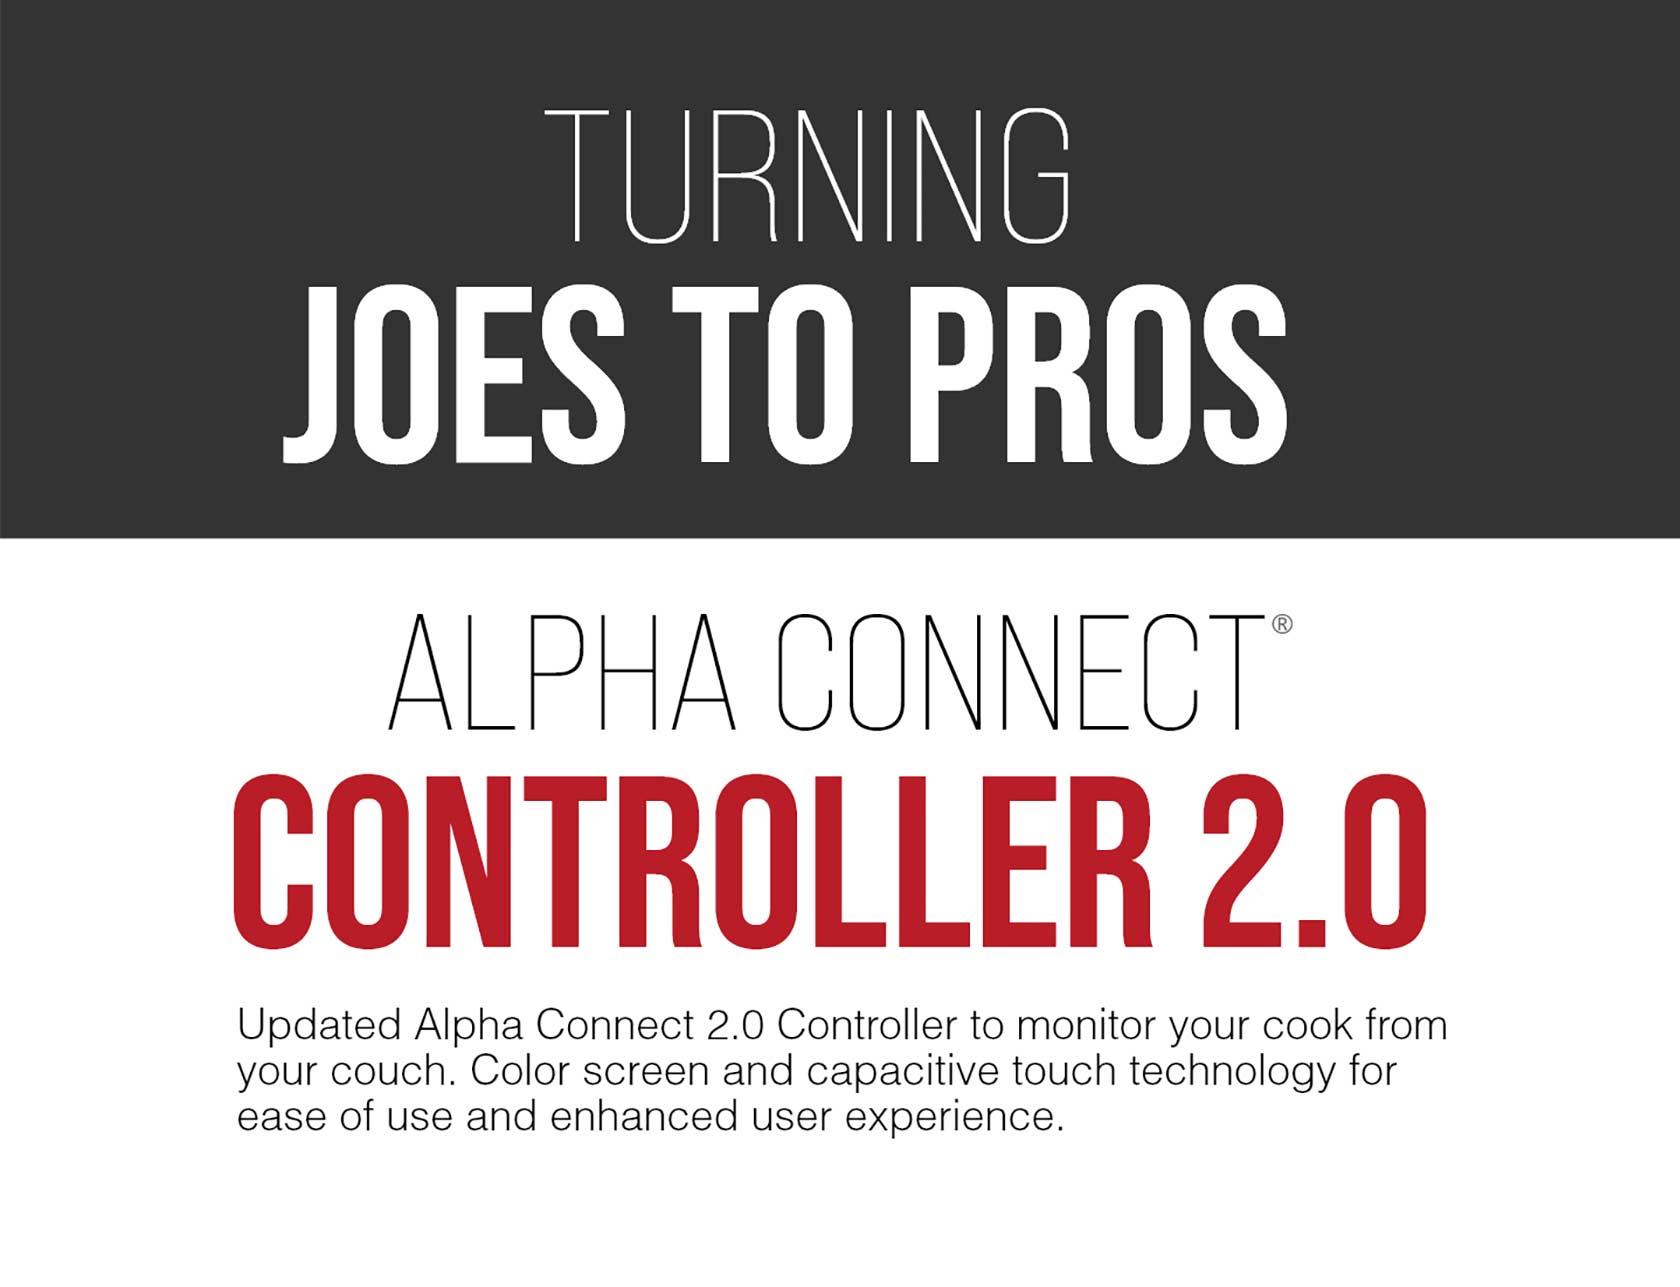 Turning Joe's to pro's alpha connect controller 2.0- Updated Alpha connect 2.0 controller to monitor your cook from your couch. Color screen and capacitive touch technology for ease of use and enhanced user experience. 